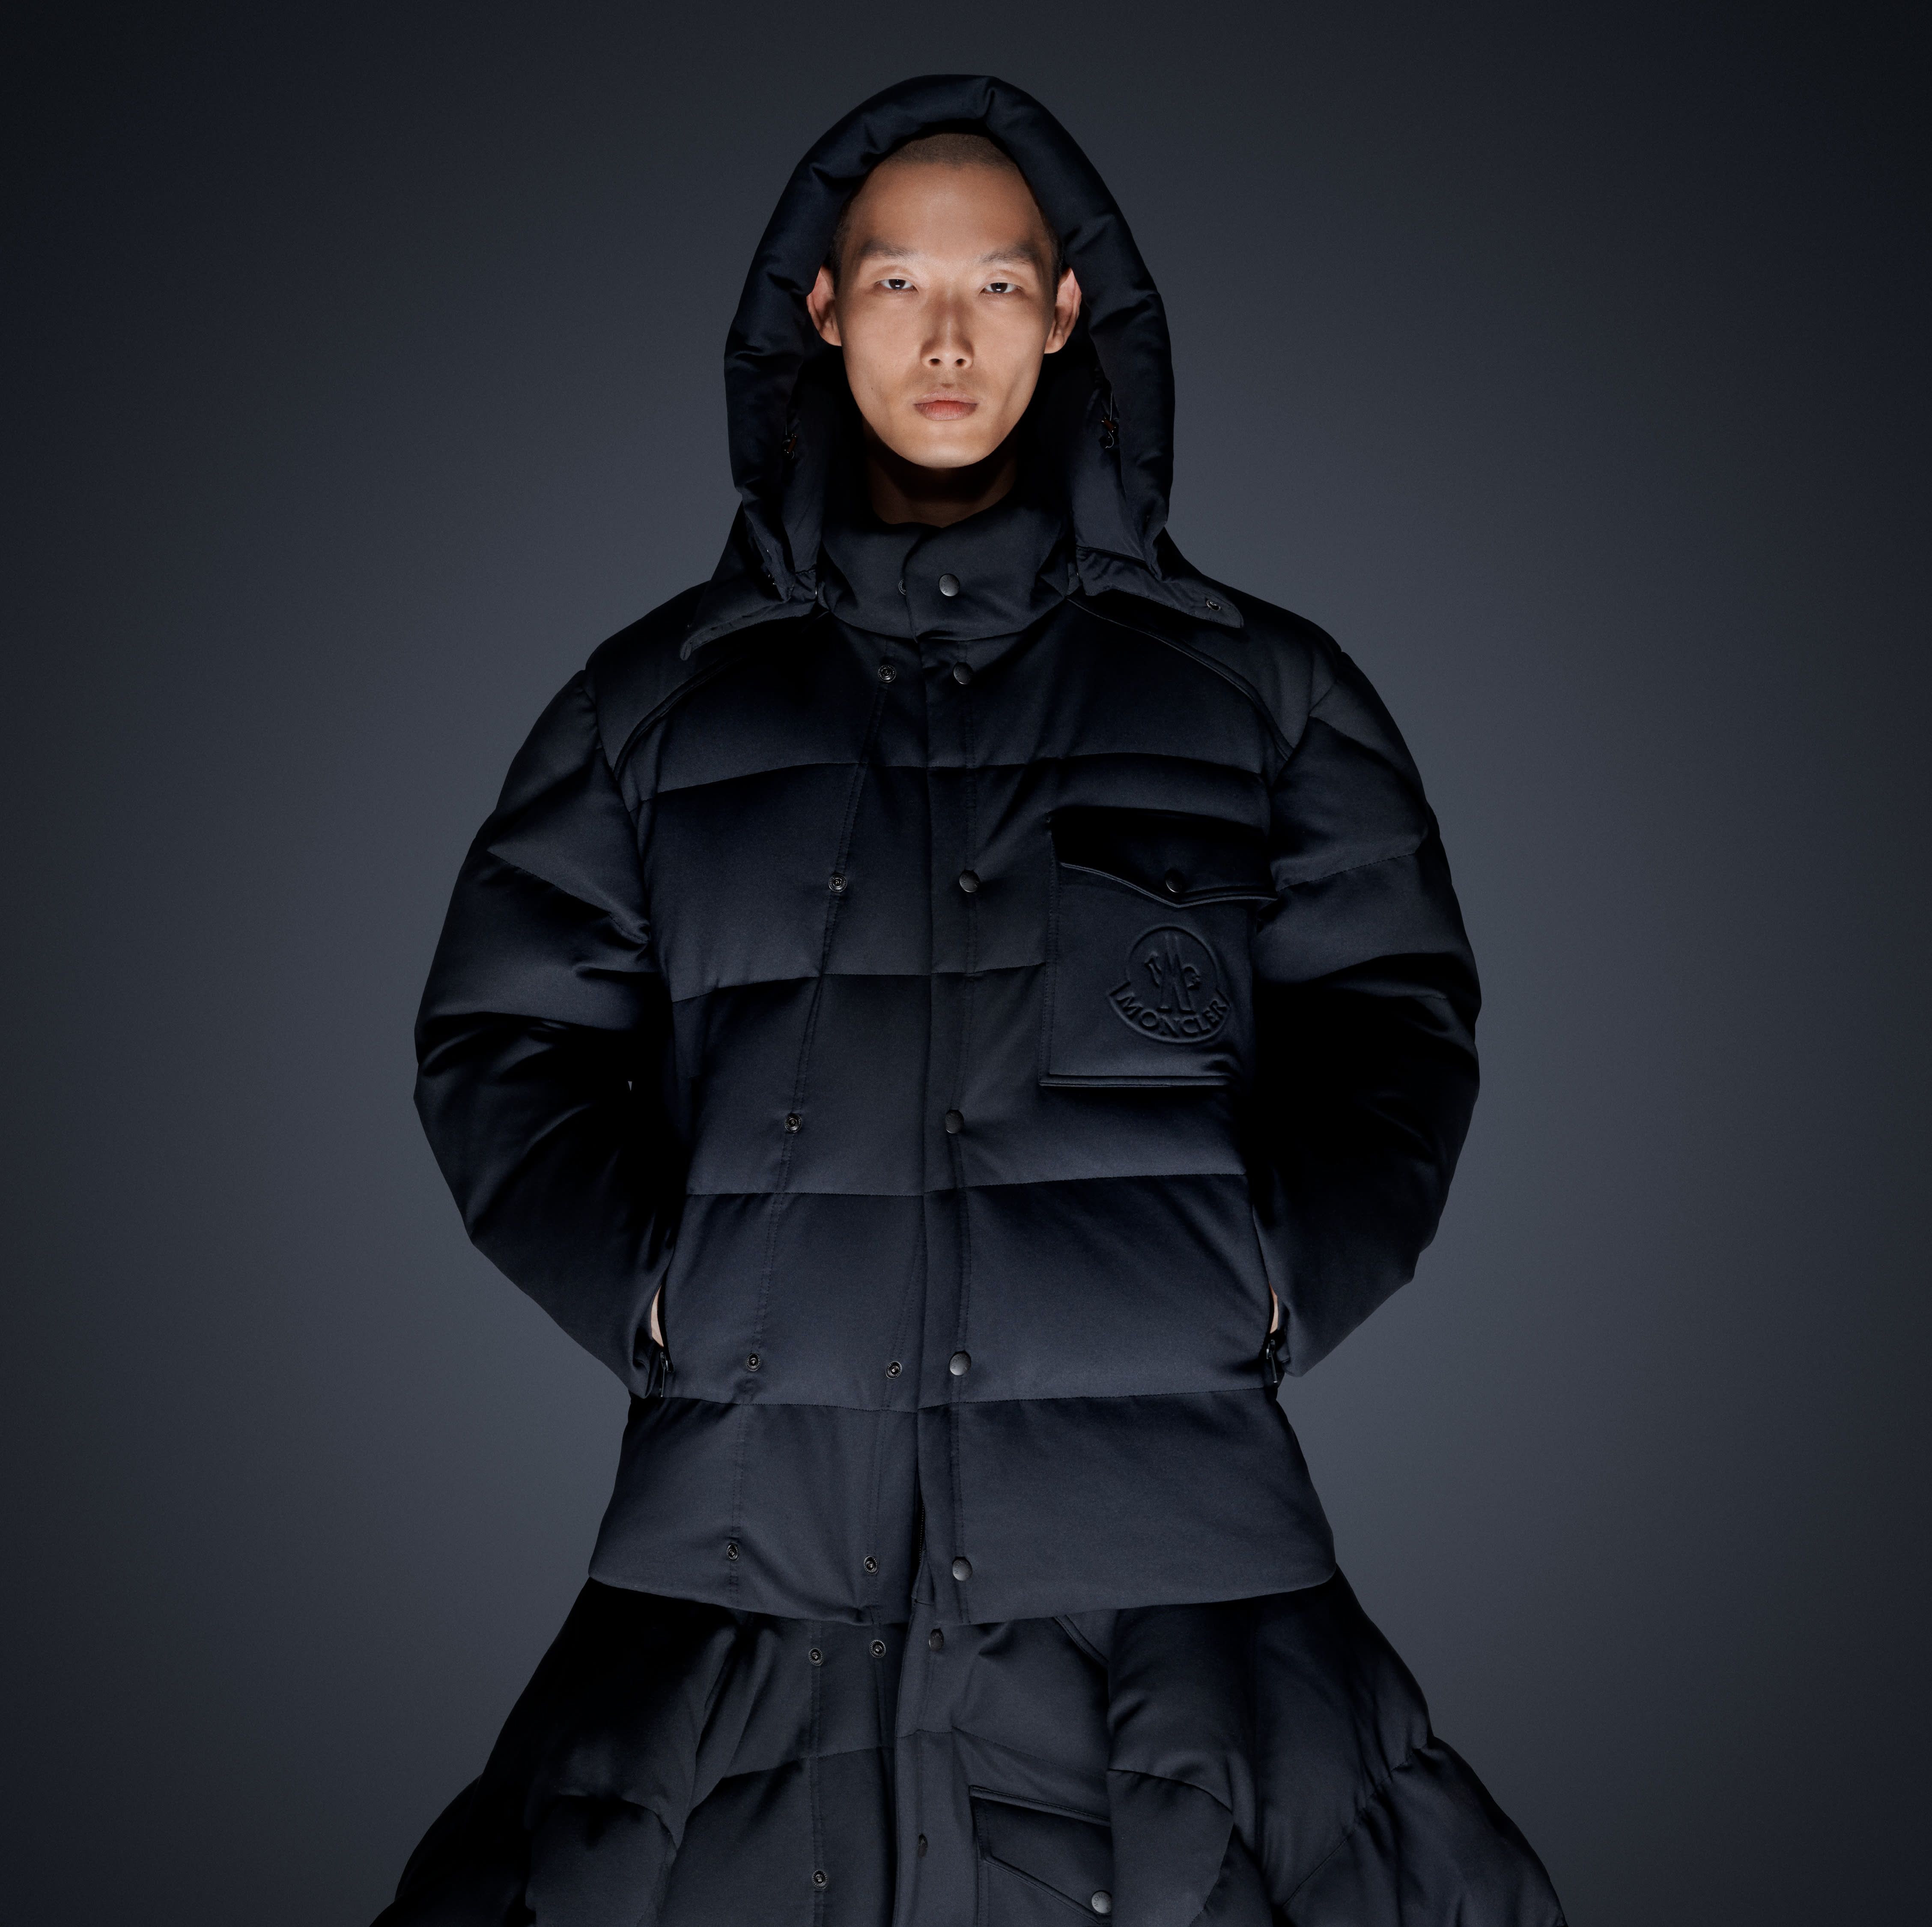 Moncler Just Brought Back the First Jacket to Climb K2